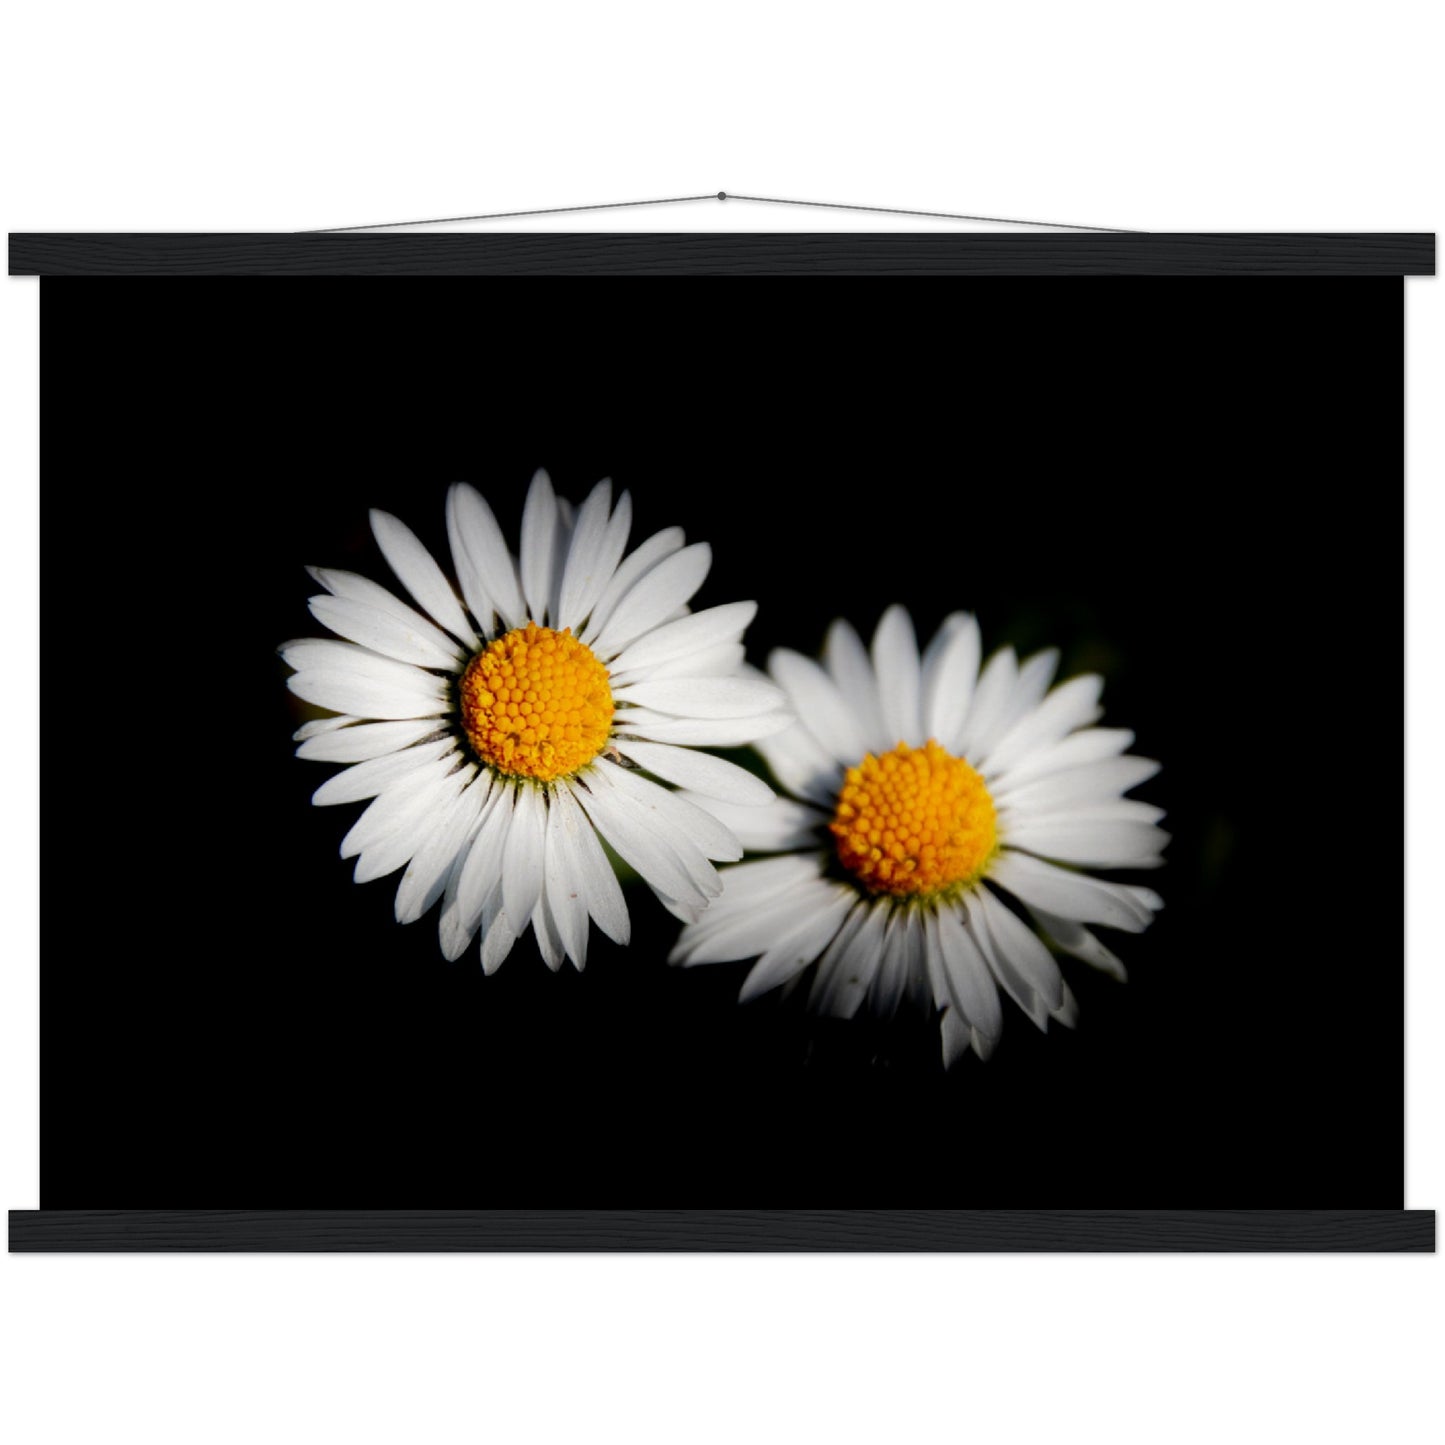 Two radiant daisies, premium poster made of museum-quality matt paper with wooden strips